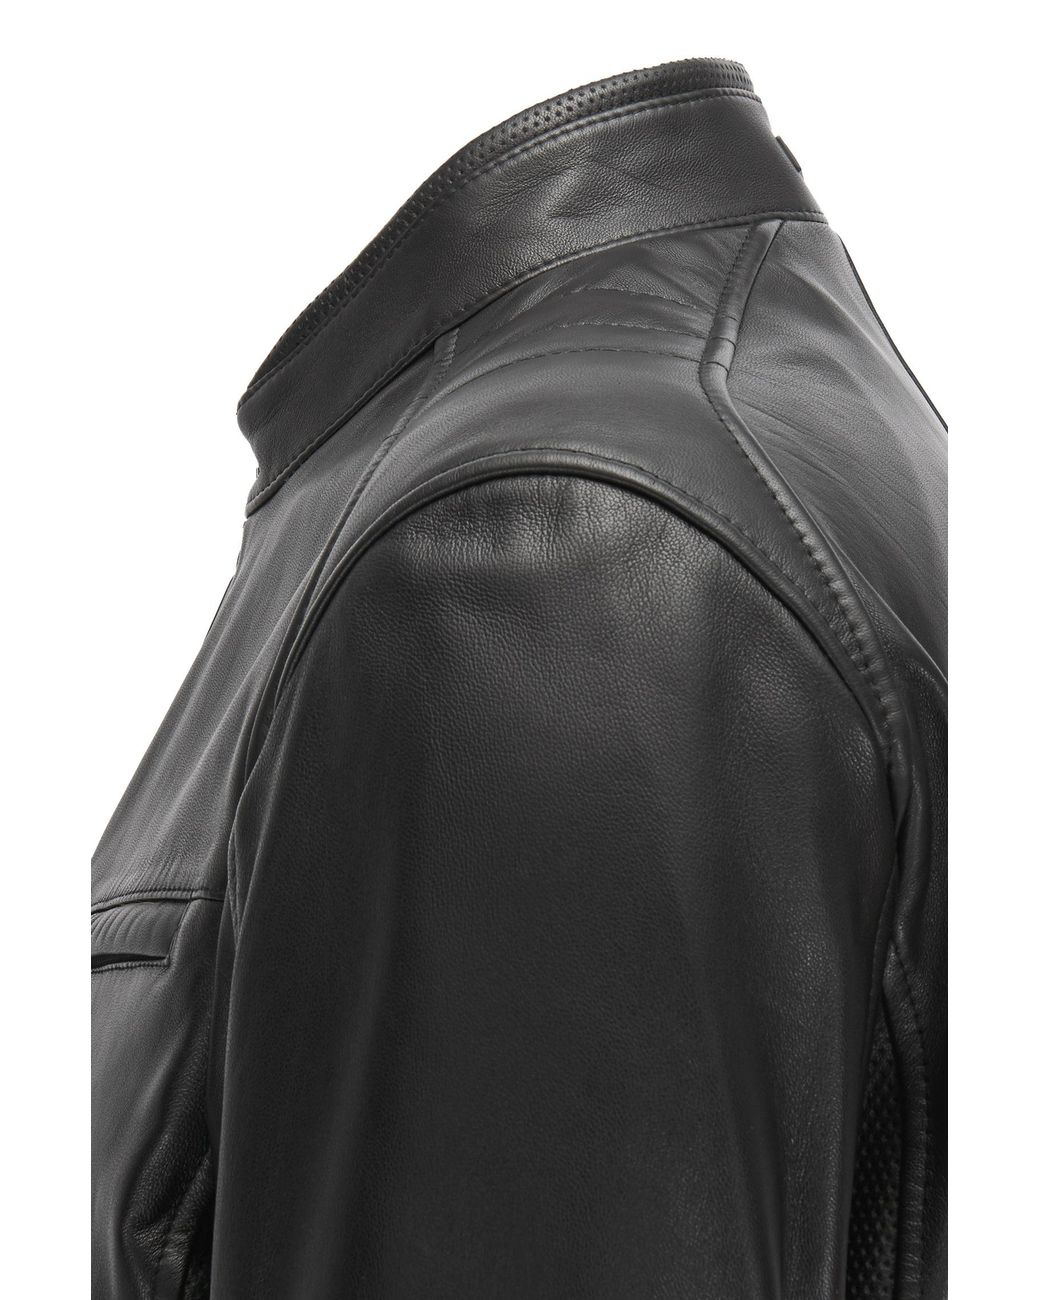 BOSS by HUGO BOSS Regular-fit Mercedes-benz Leather Jacket in Black for Men  | Lyst Canada